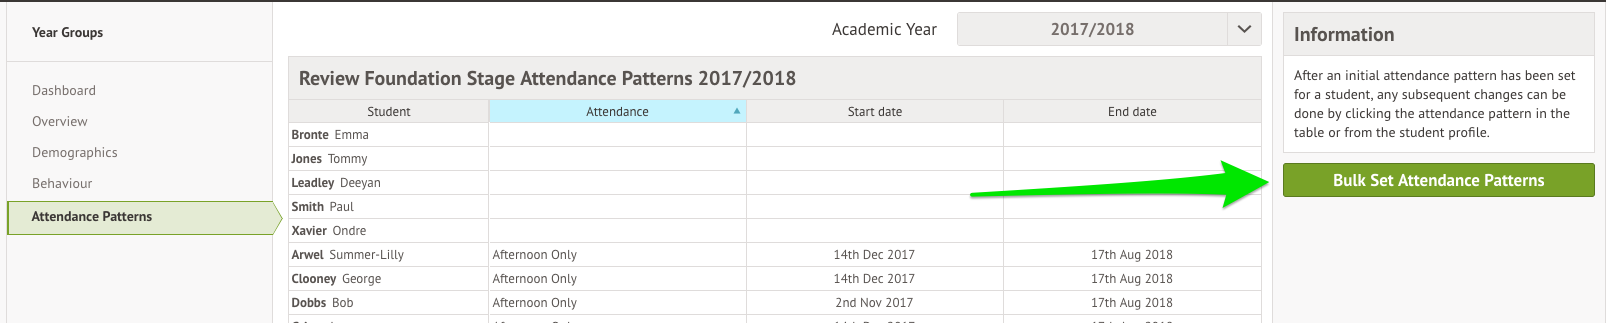 https___sunnyville_uk_arbor_sc___student-attendance-pattern-ui_review-student-attendance-patterns_academic-year-id_13_curriculum-tier-code_FOUNDATION_STAGE_academic-level-id_74.png